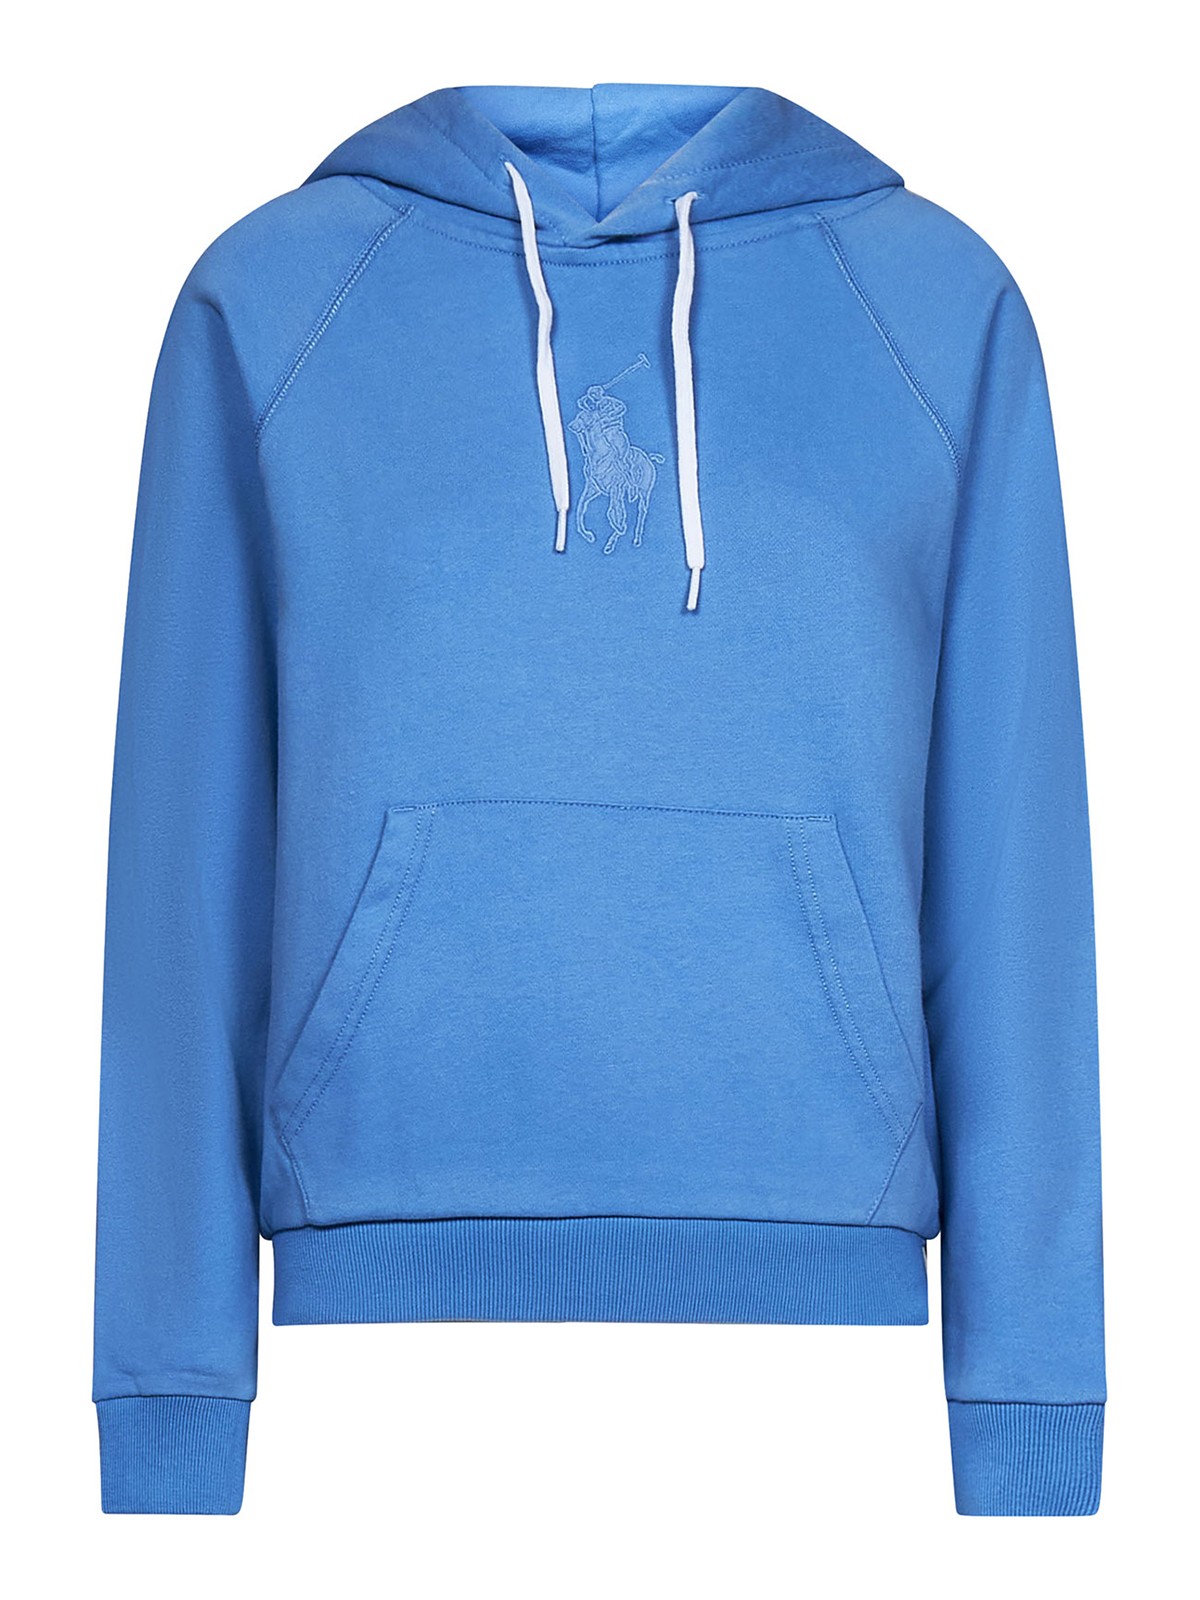 Polo Ralph Lauren Sweatshirt With Maxi Logo Embroidery In Light Blue